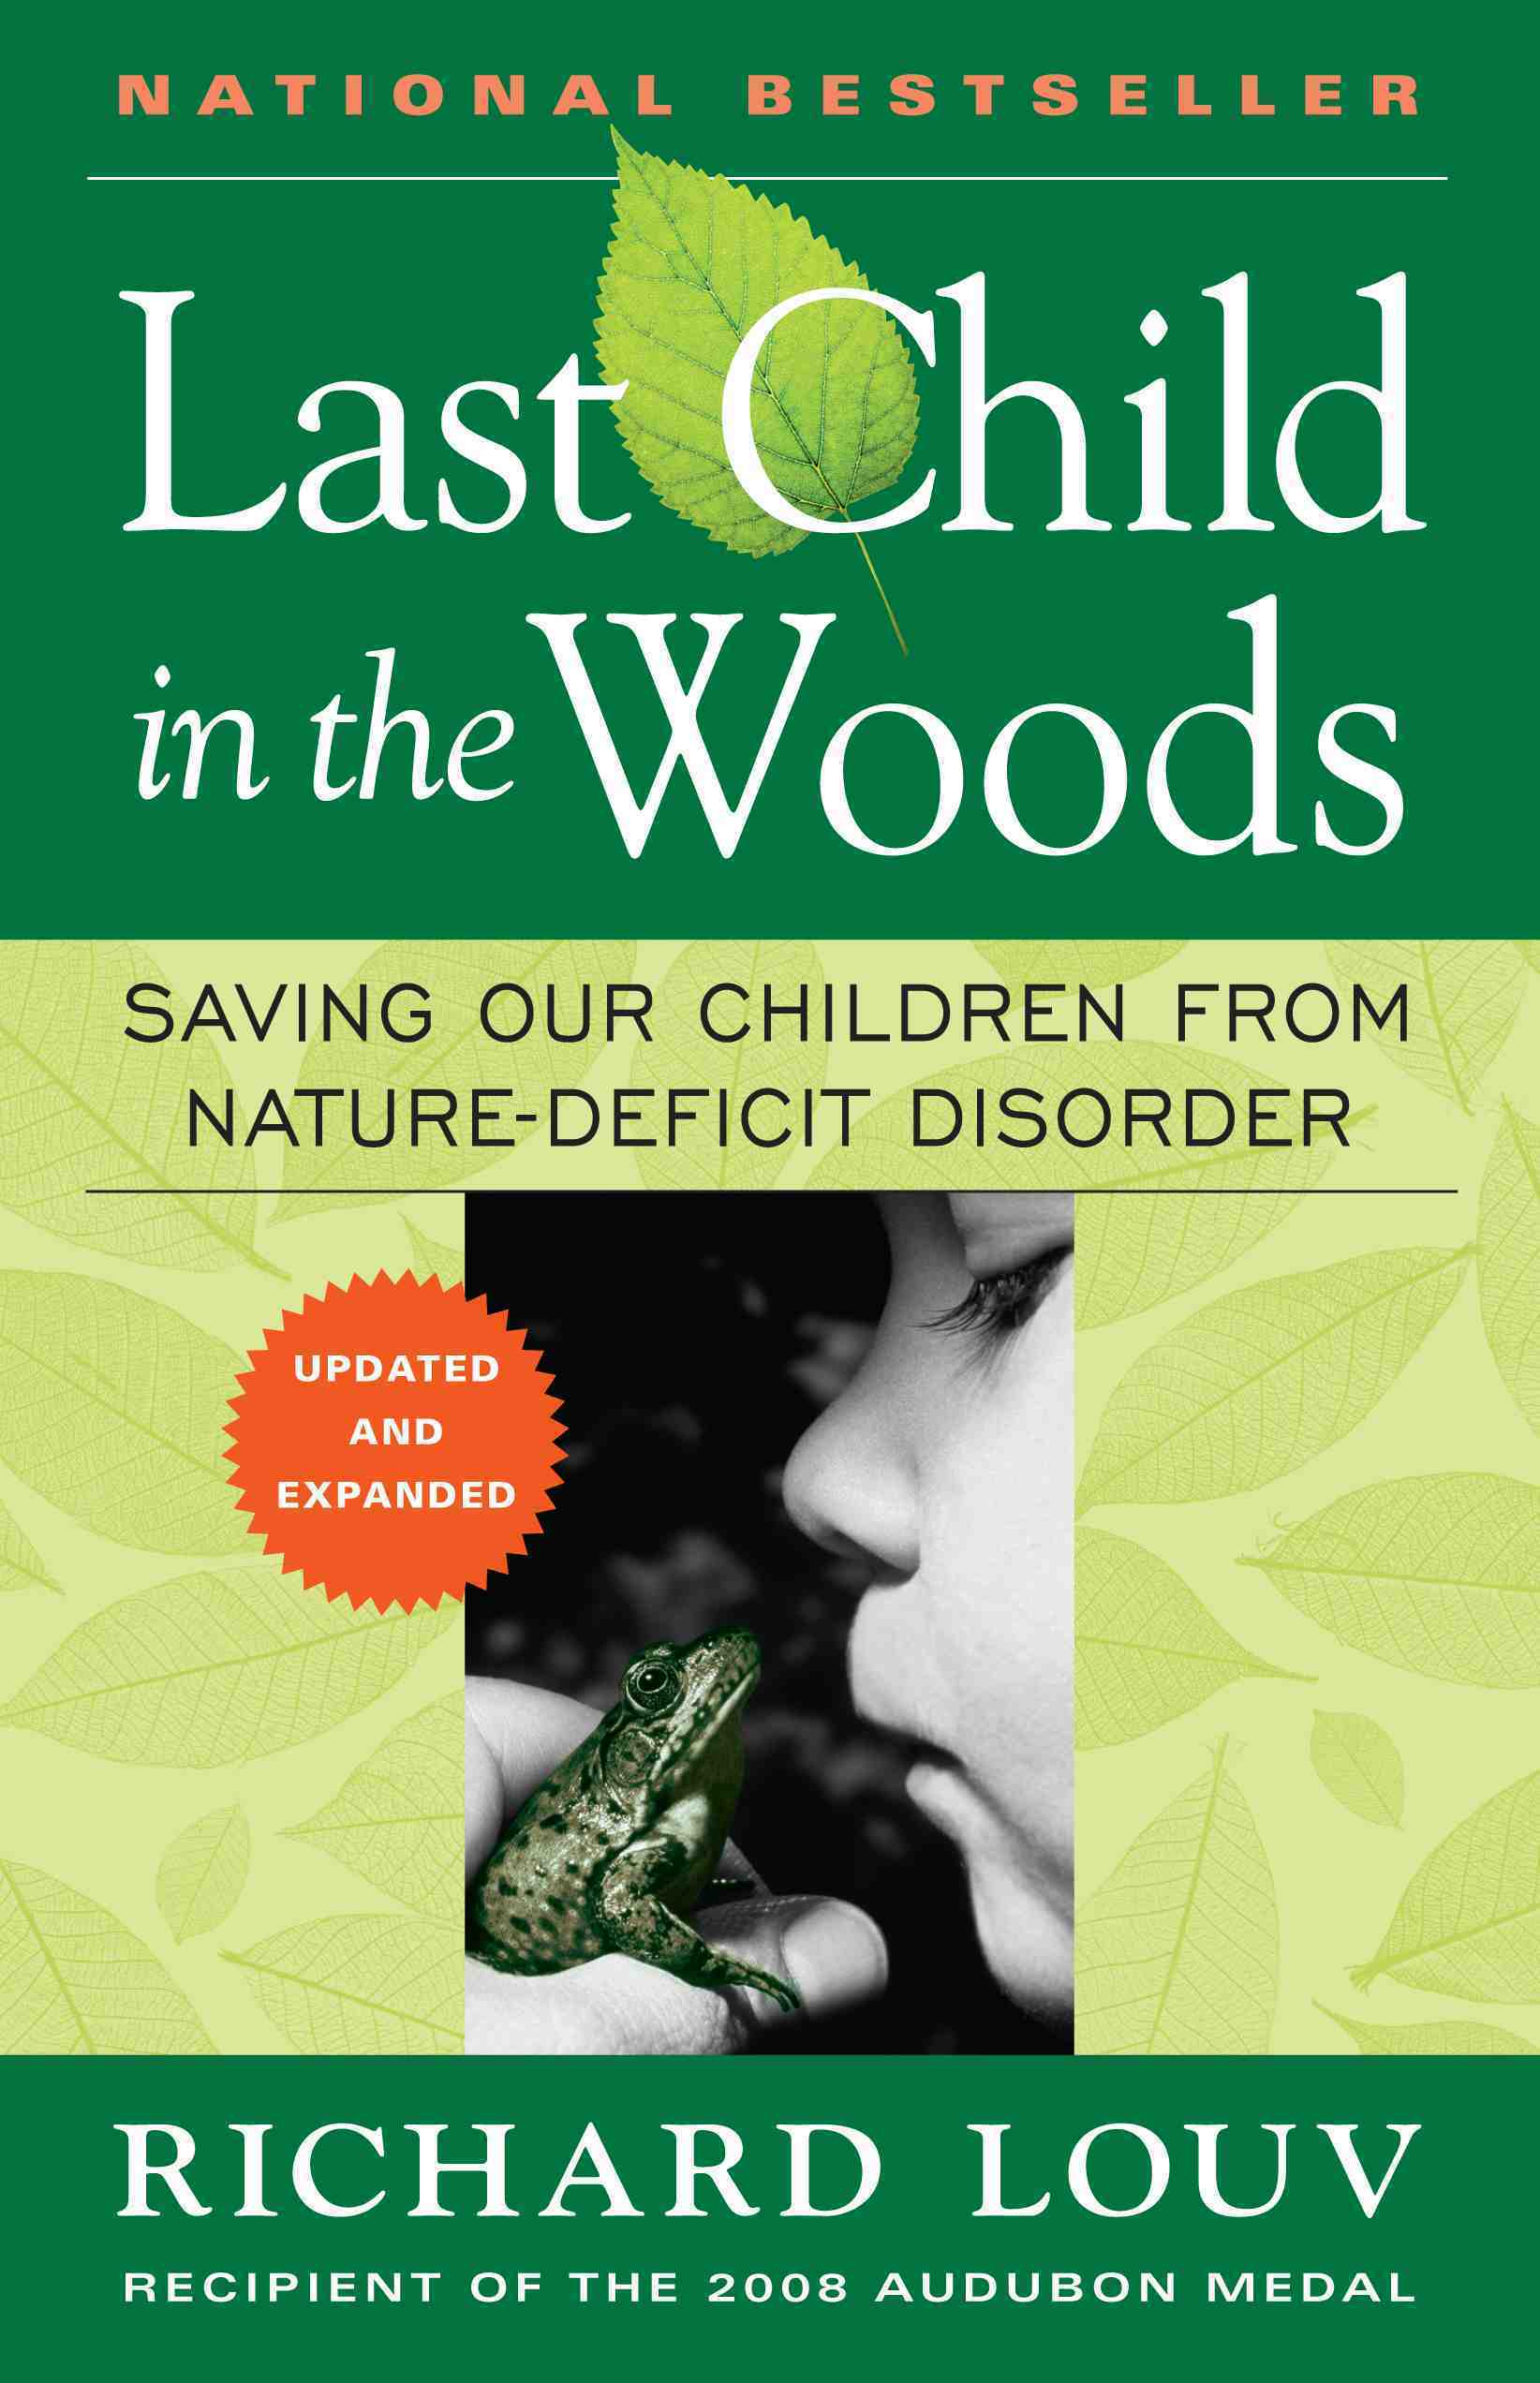 Image of cover of Last Child In the Woods book